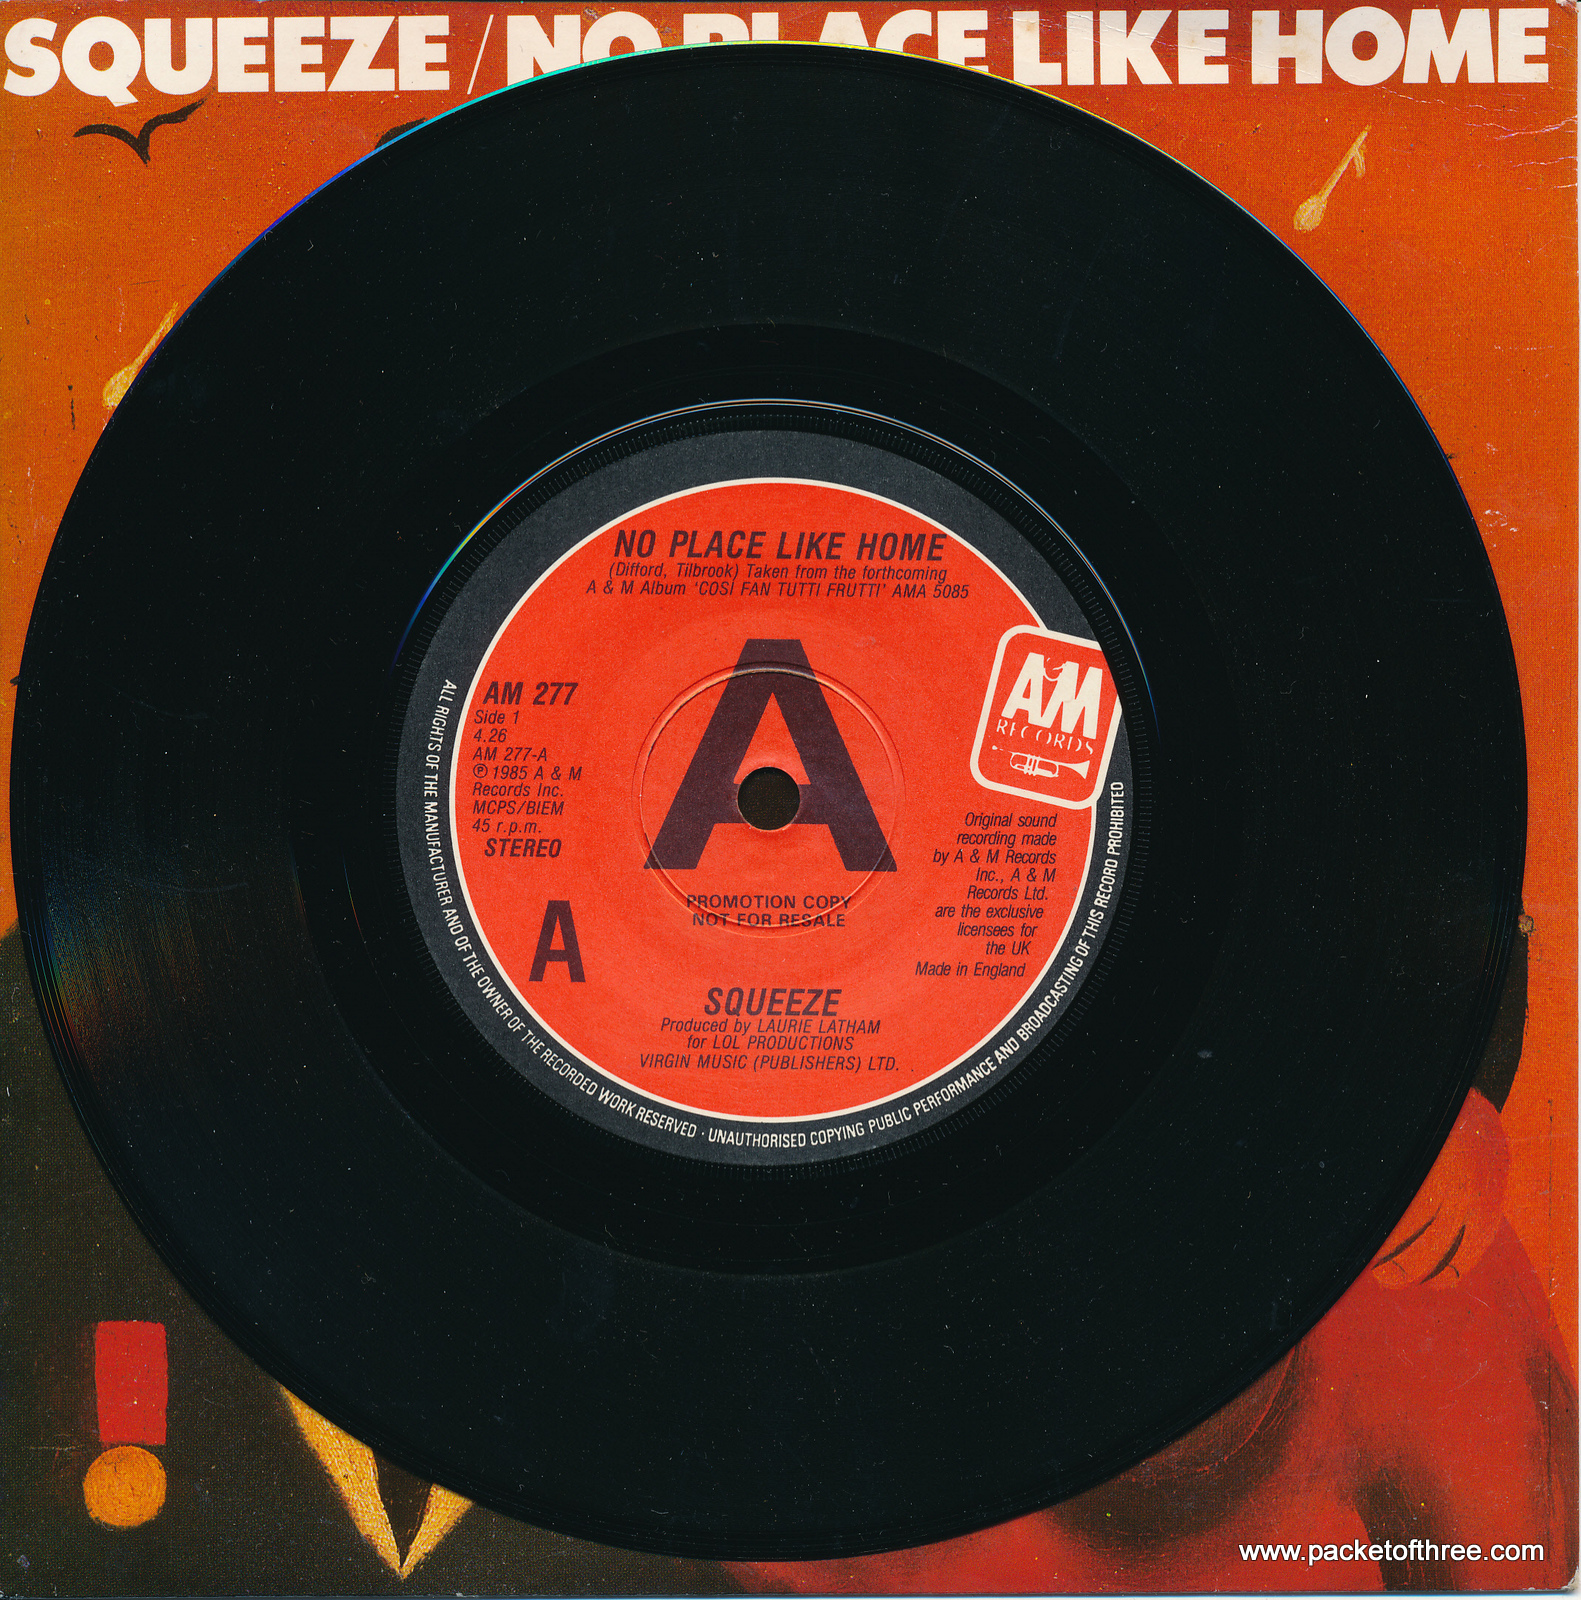 Squeeze - No Place Like Home - UK - 7" - promotional copy - picture sleeve